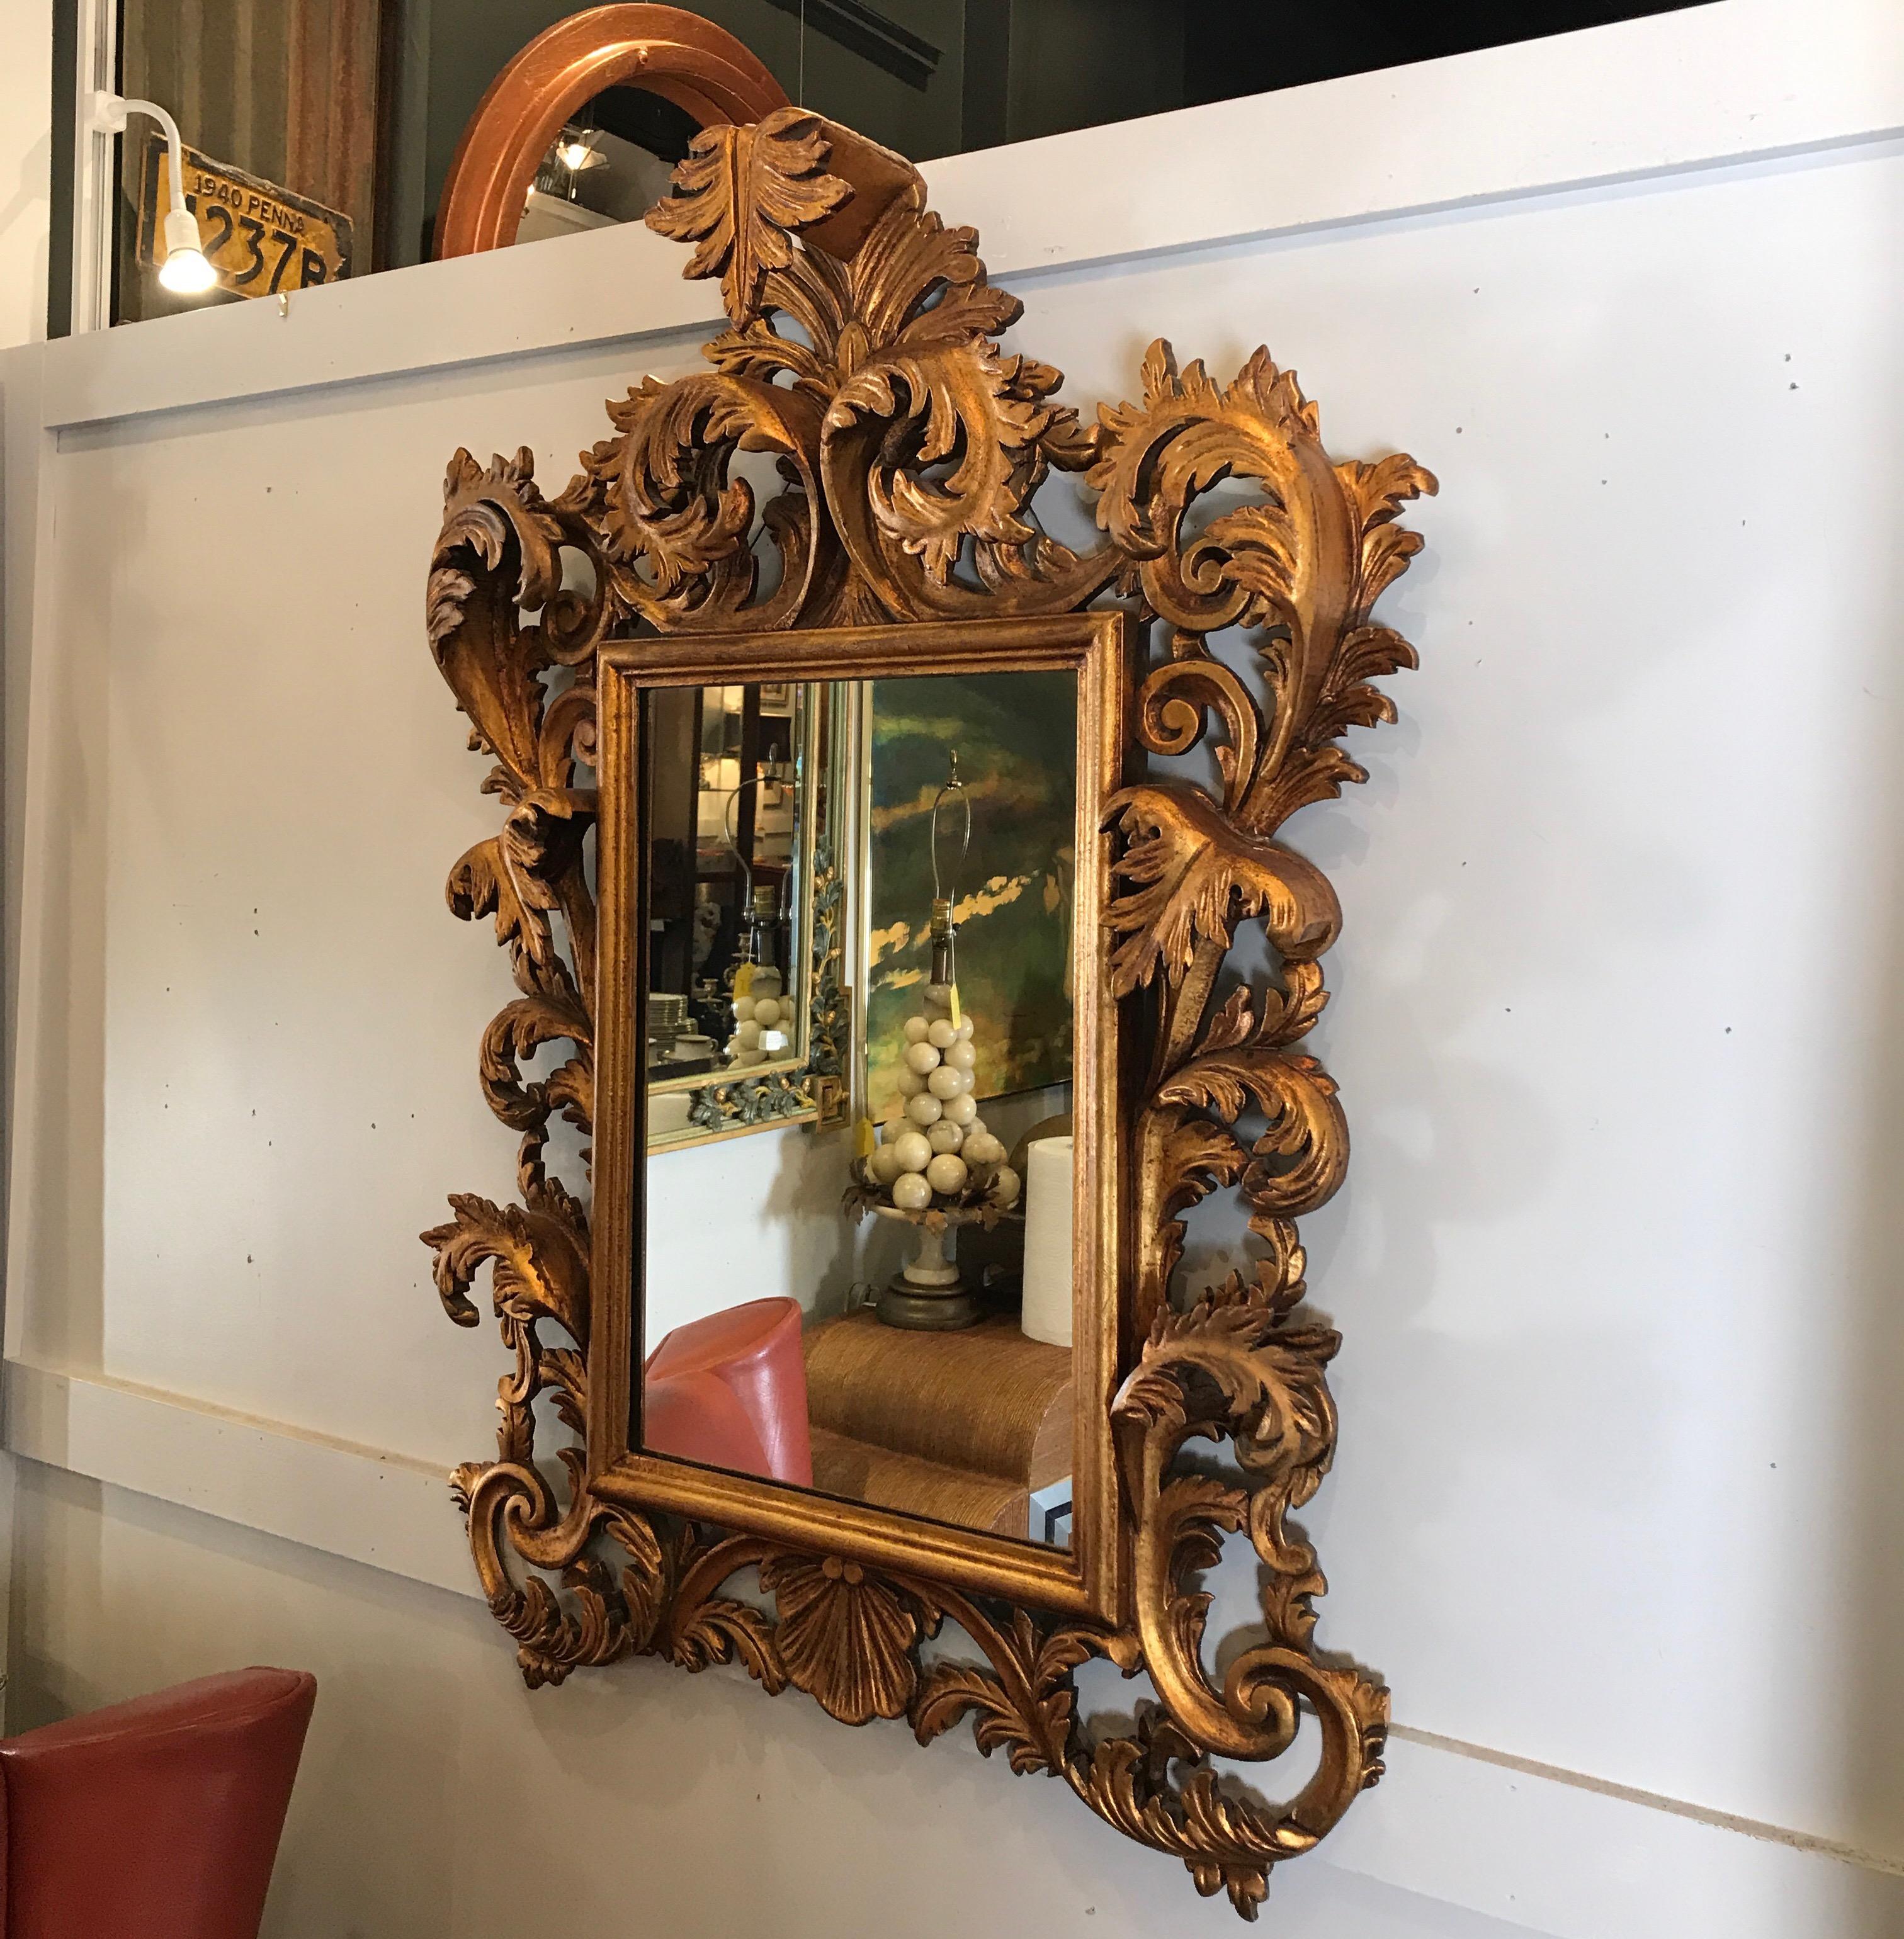 Elaborately carved Italian giltwood Rococo mirror. The frame with high relief scrolls of acanthus leaves at the top, sides and bottom. The top with a center plume pediment.